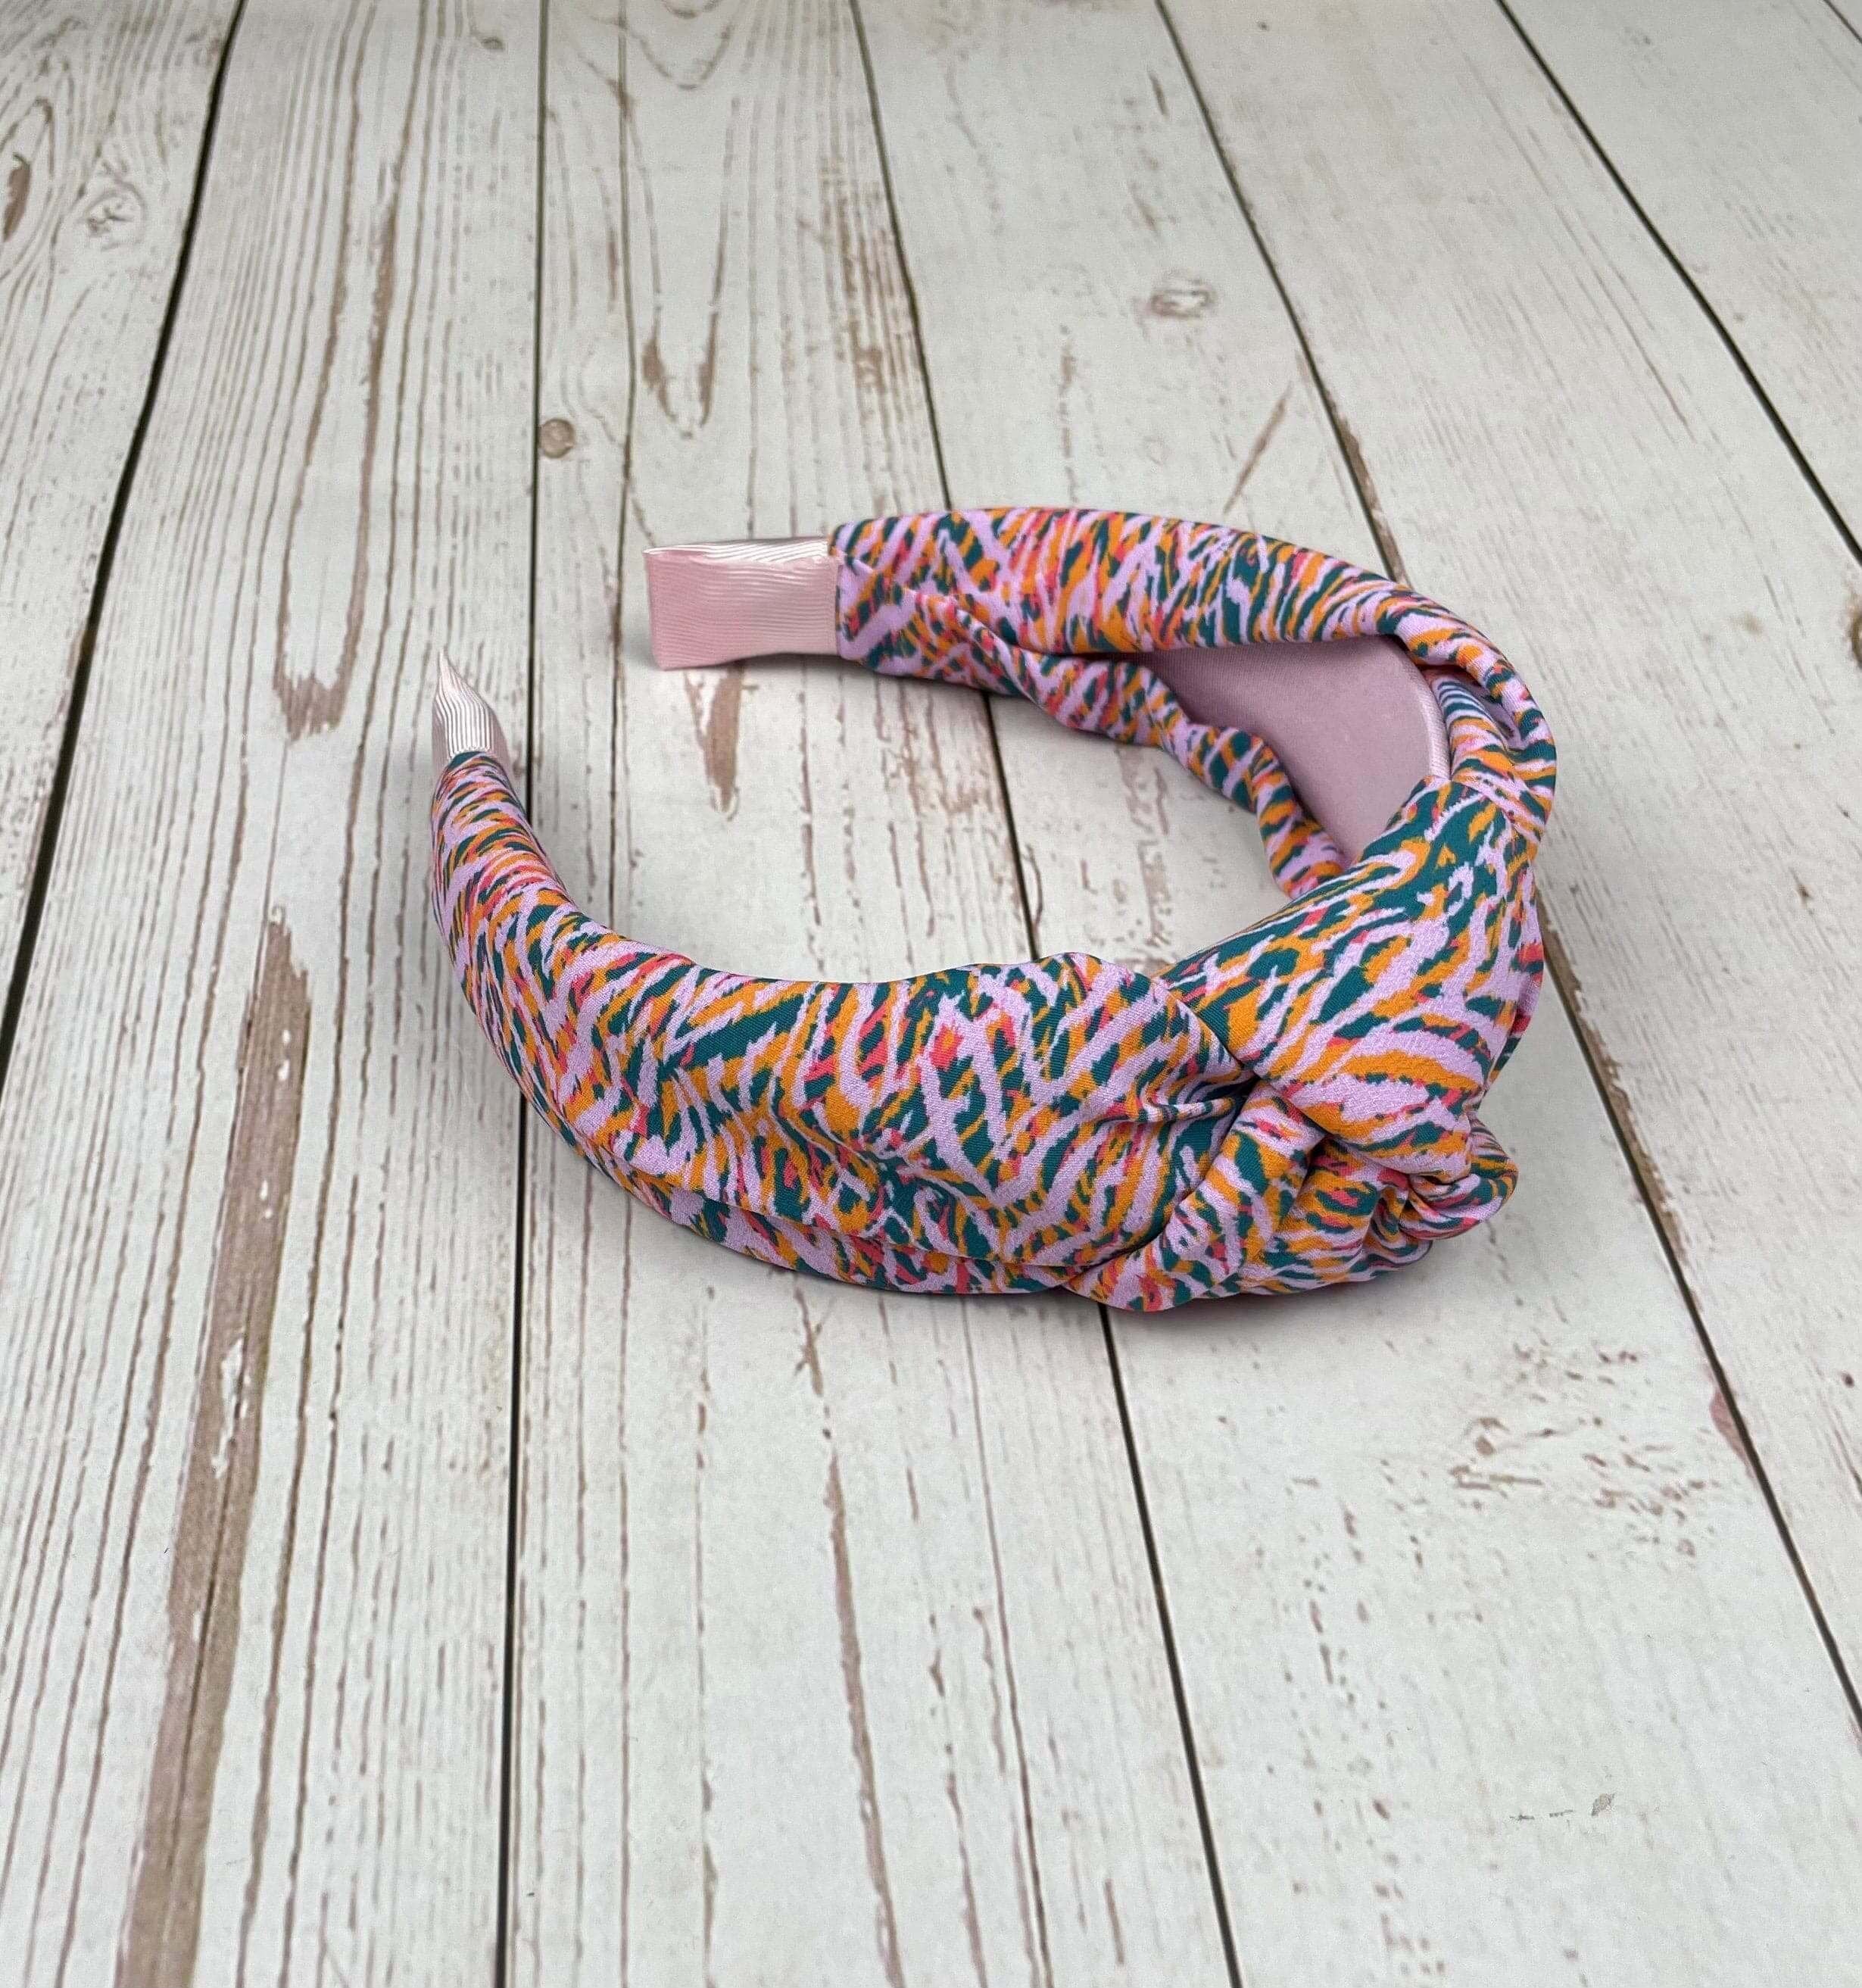 Make the perfect gift for a fashionable girl with this Multicolor KNOTTED HEADBAND